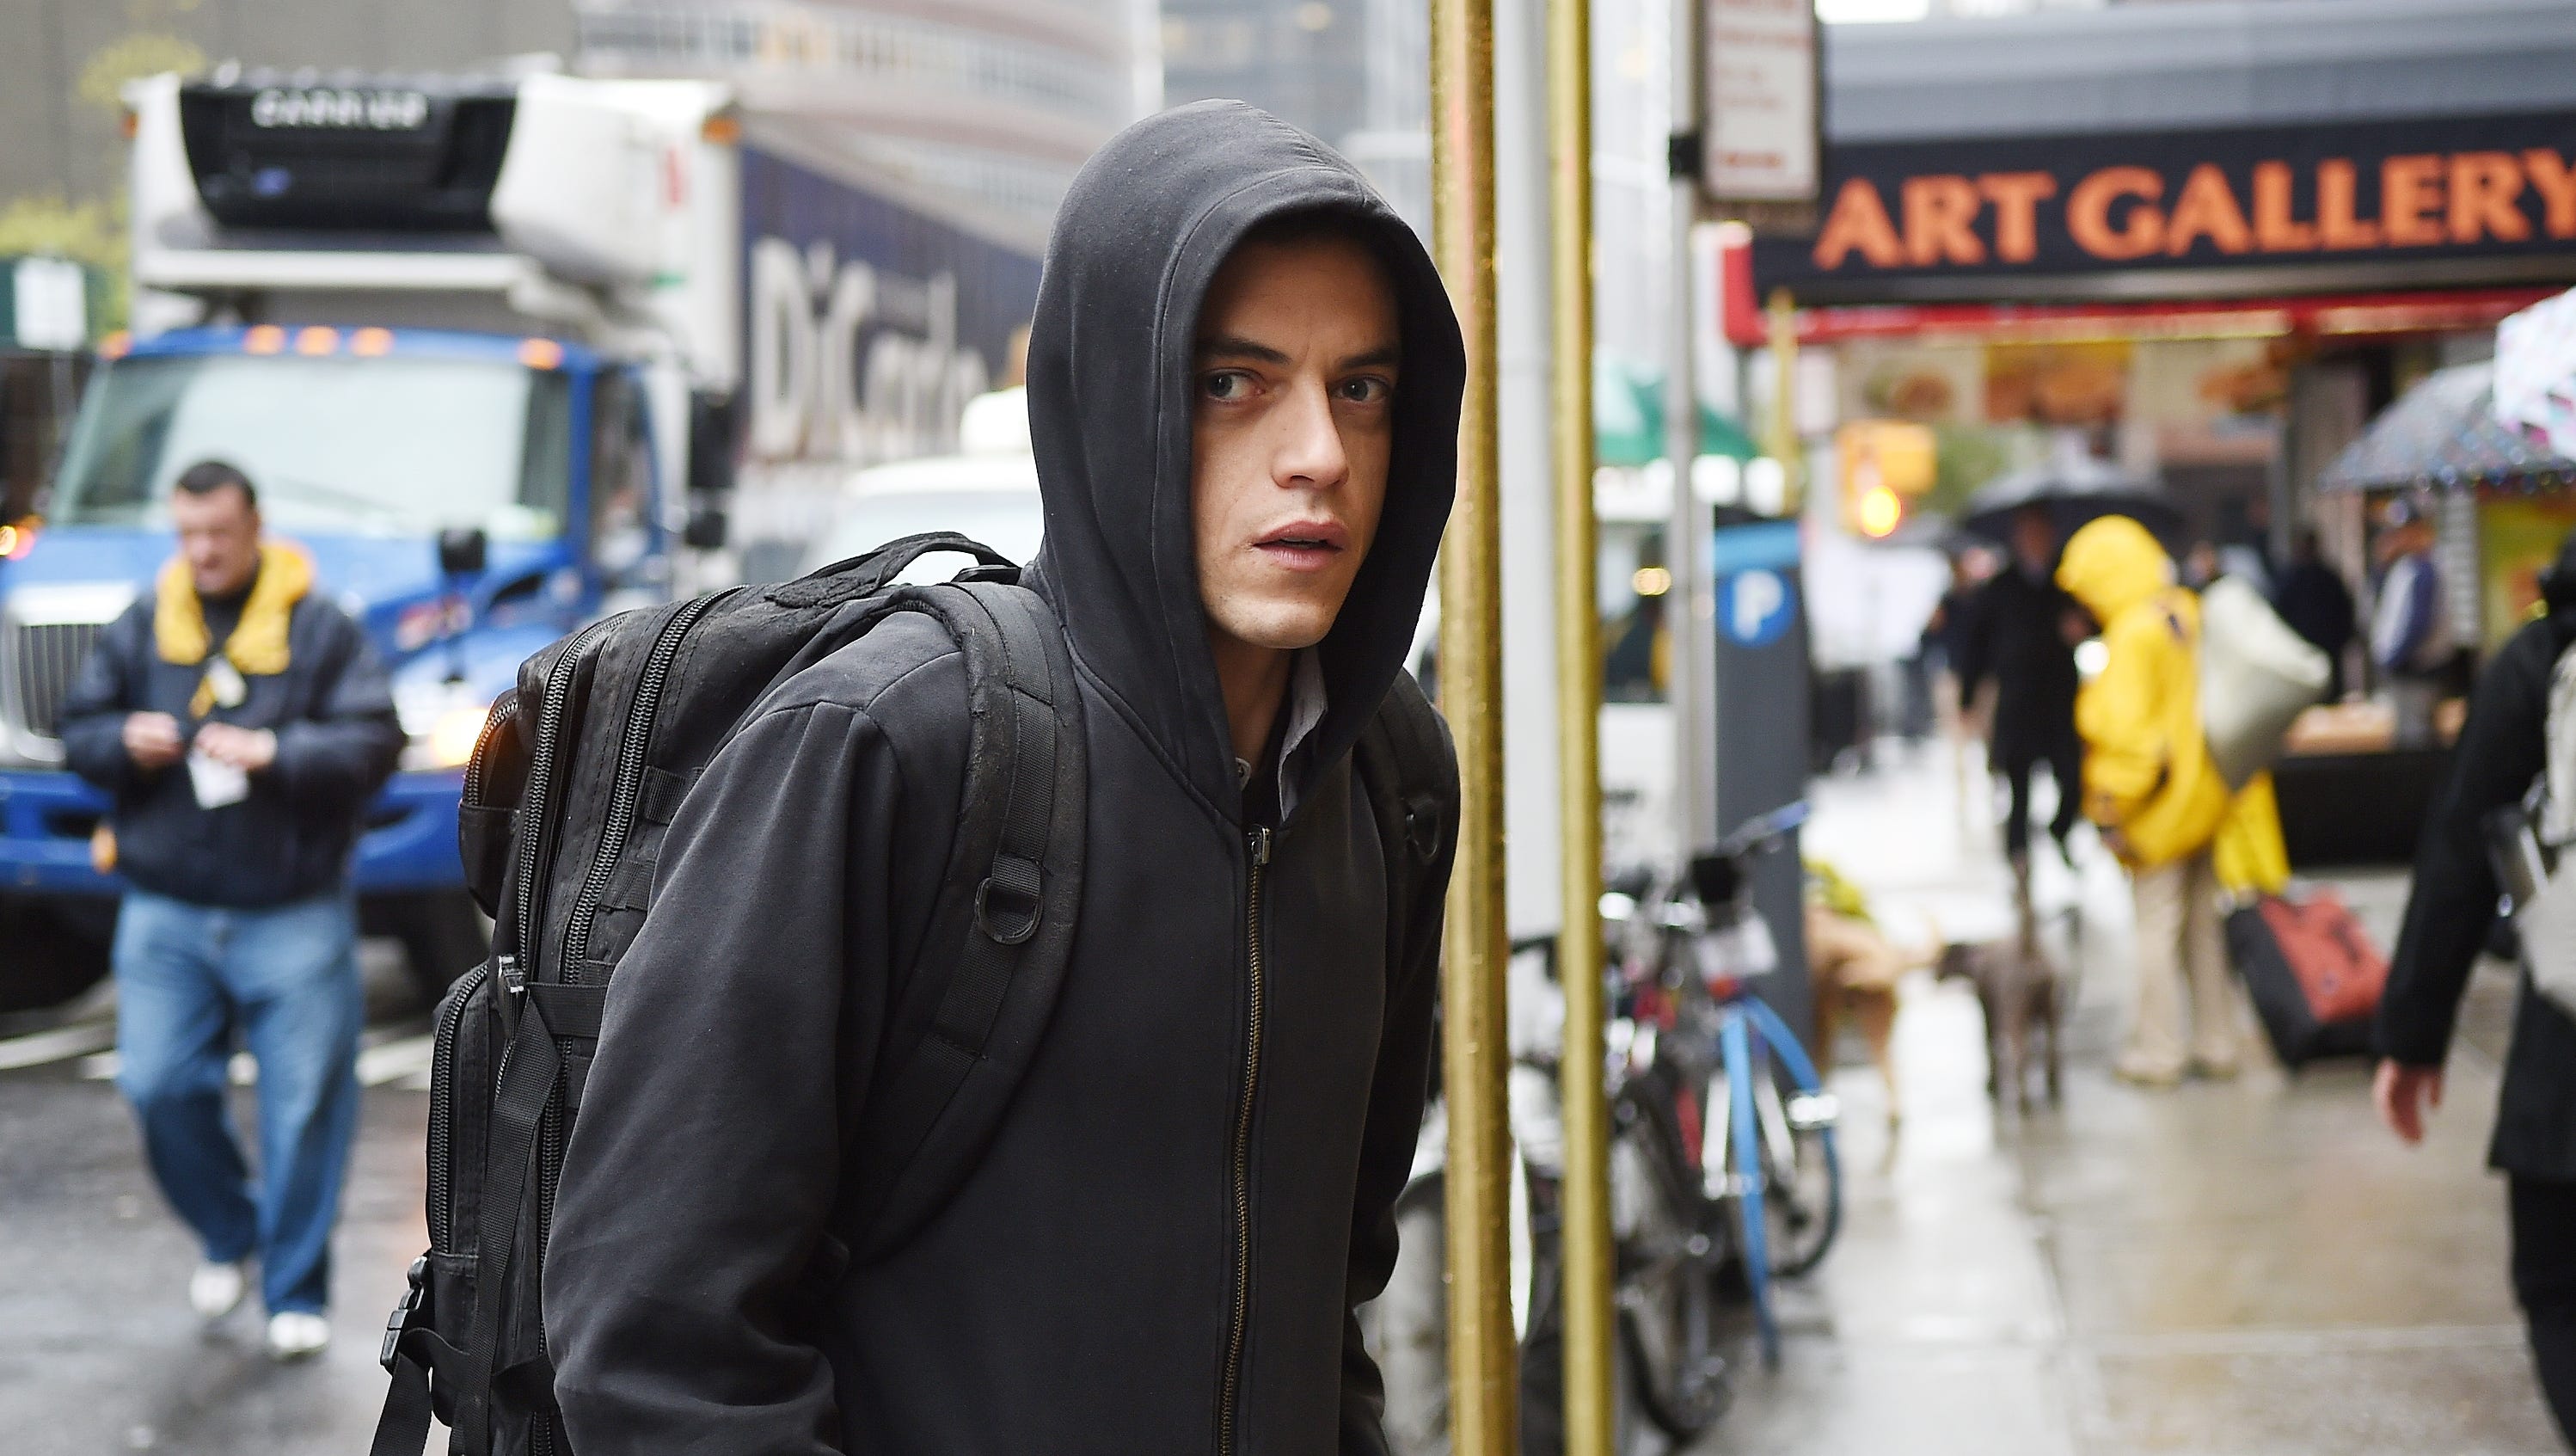 Afvise Tæl op segment What you need to remember from 'Mr. Robot' season 1